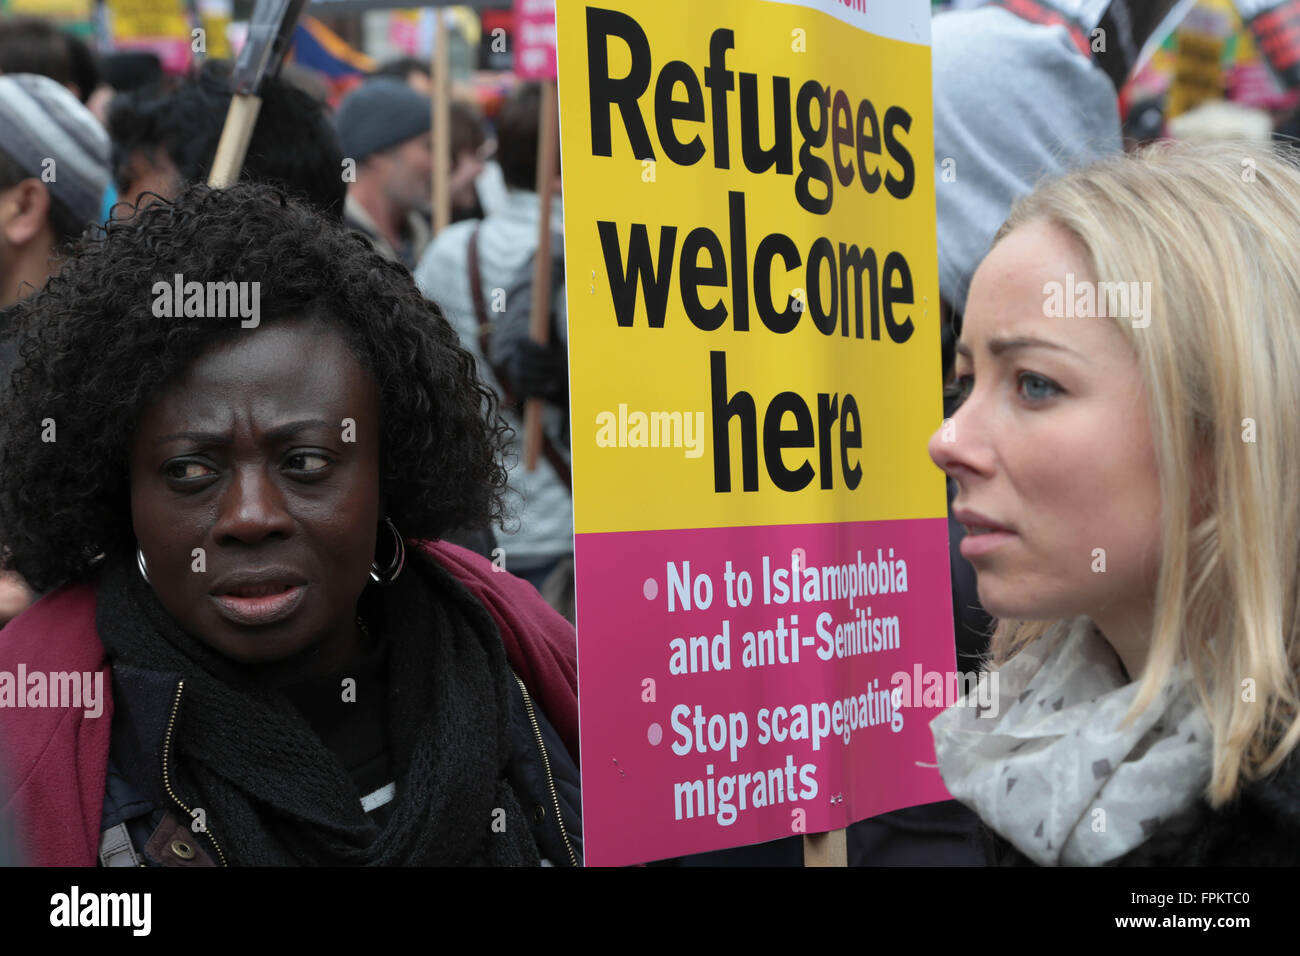 London, UK. 19th March, 2016. Women at demonstration 'Refugees Welcome here' in central London. Credit:  Thabo Jaiyesimi/Alamy Live News Stock Photo